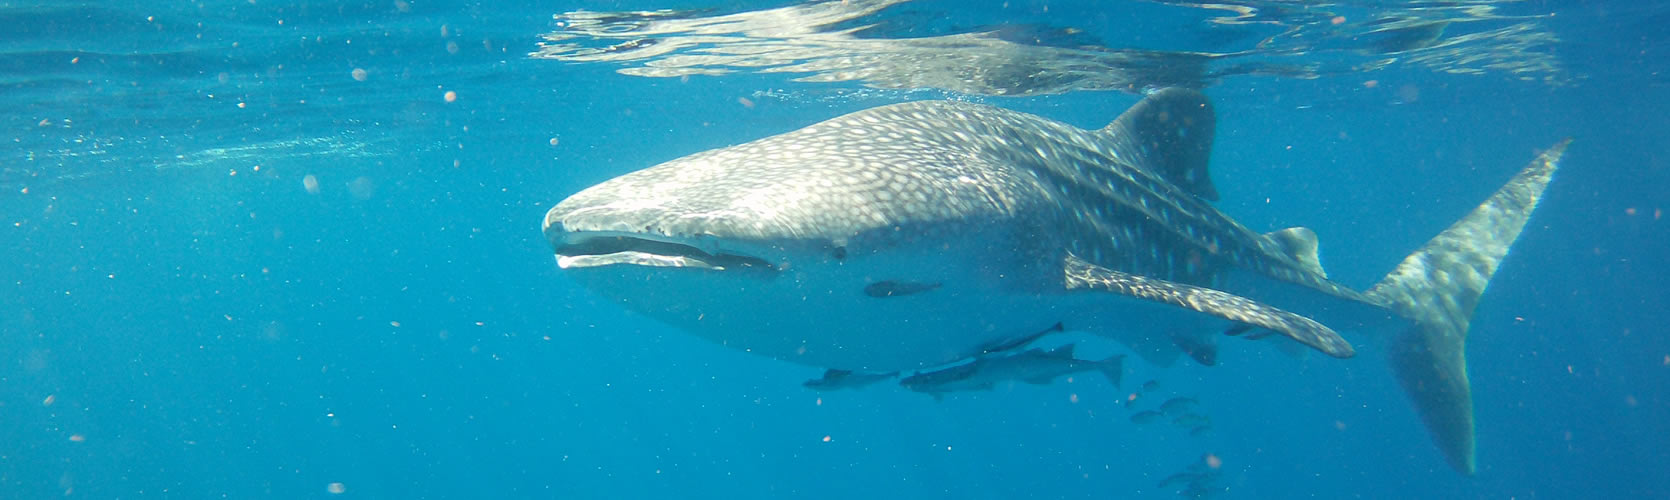 Info About the Whale shark